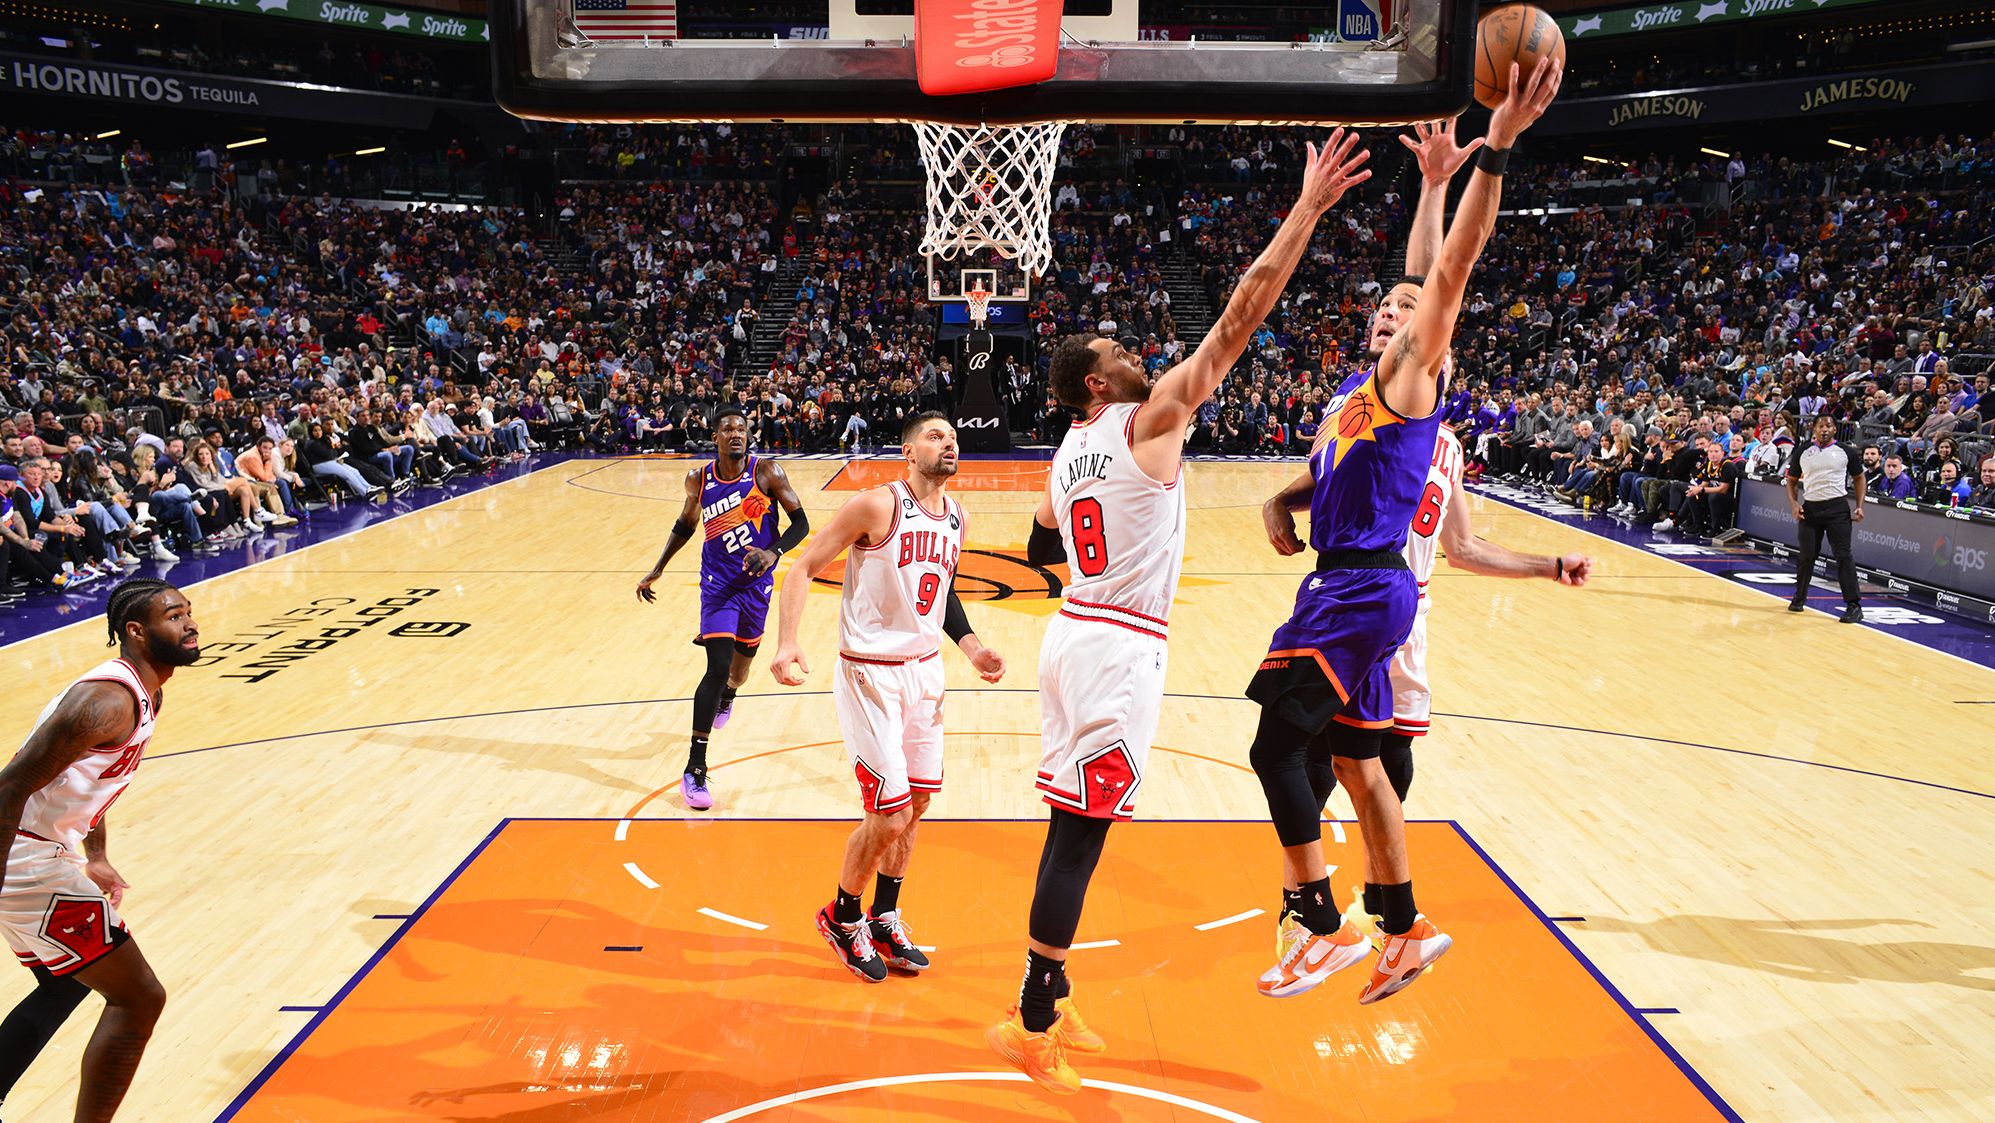 Devin Booker hits for 51, fuels Suns' rout of Bulls